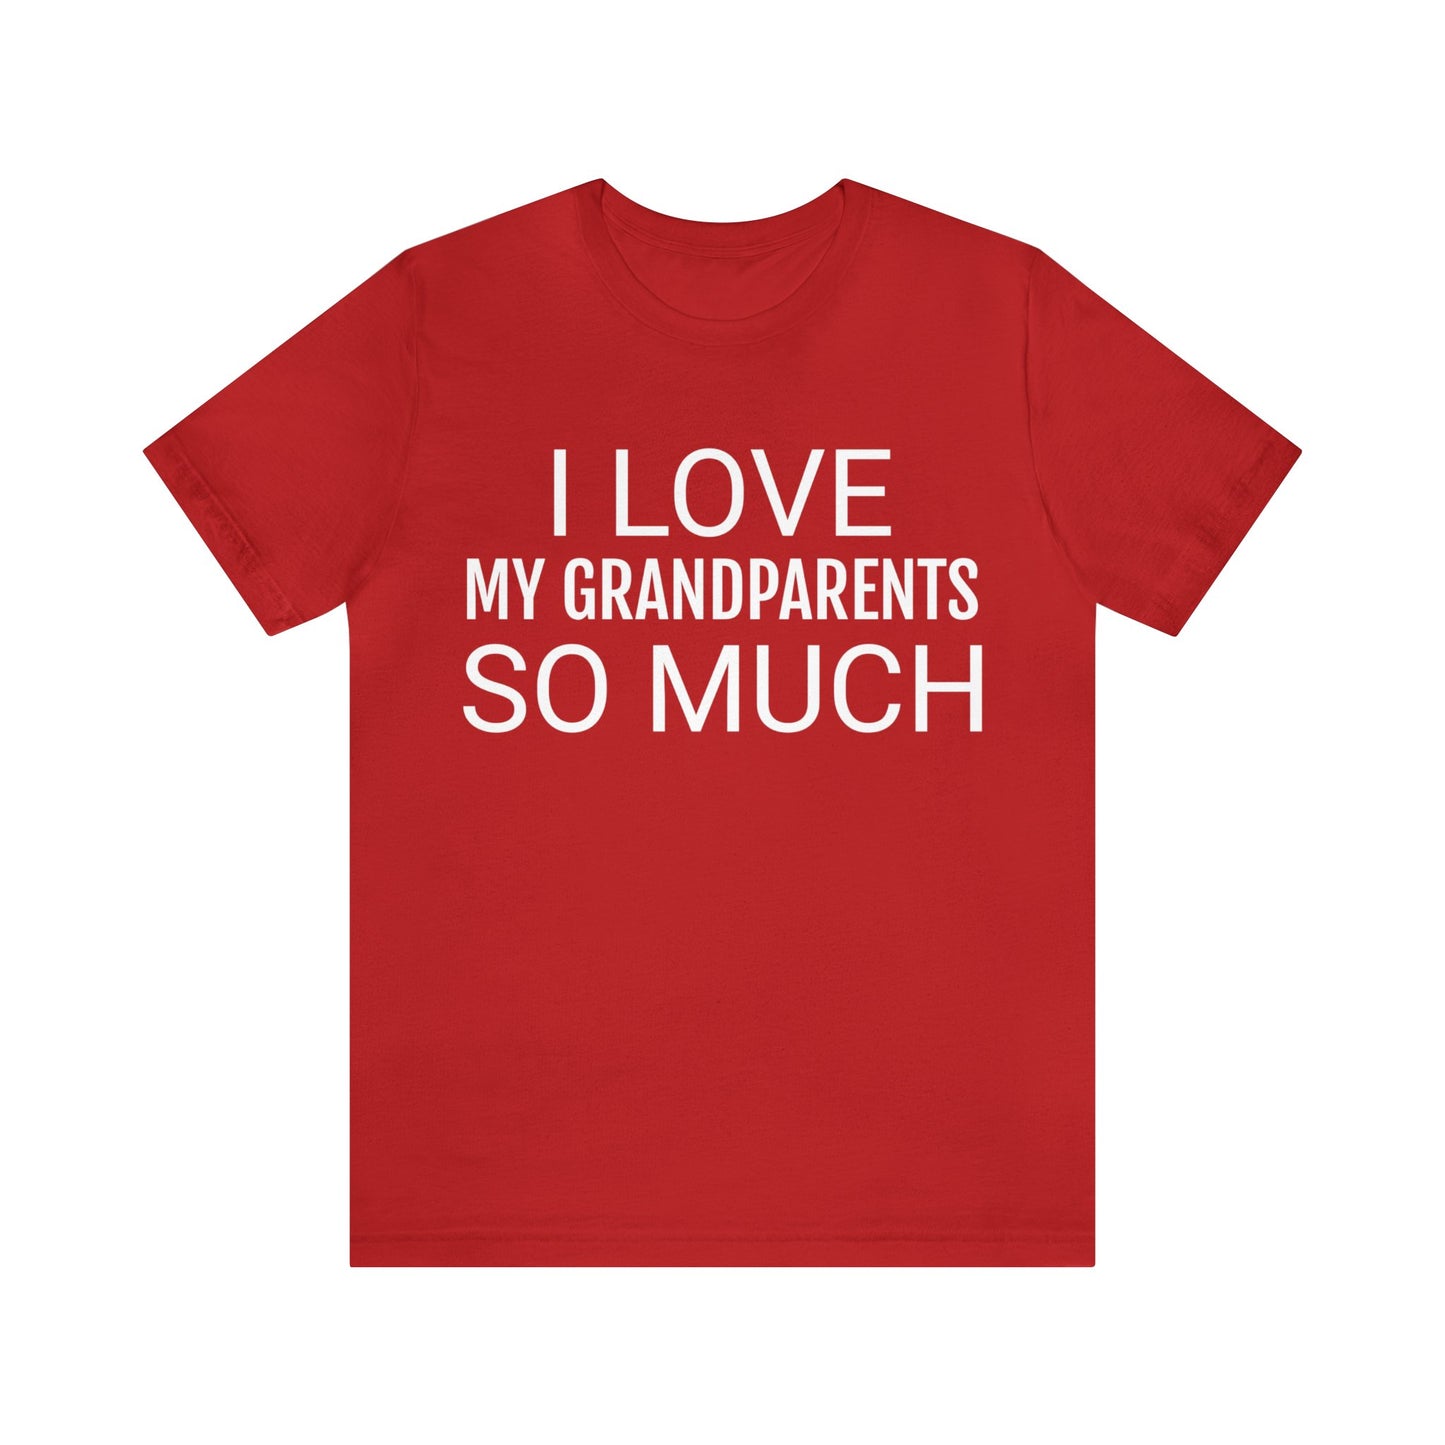 Red T-Shirt Tshirt Gift for Friends and Family Short Sleeve T Shirt Petrova Designs